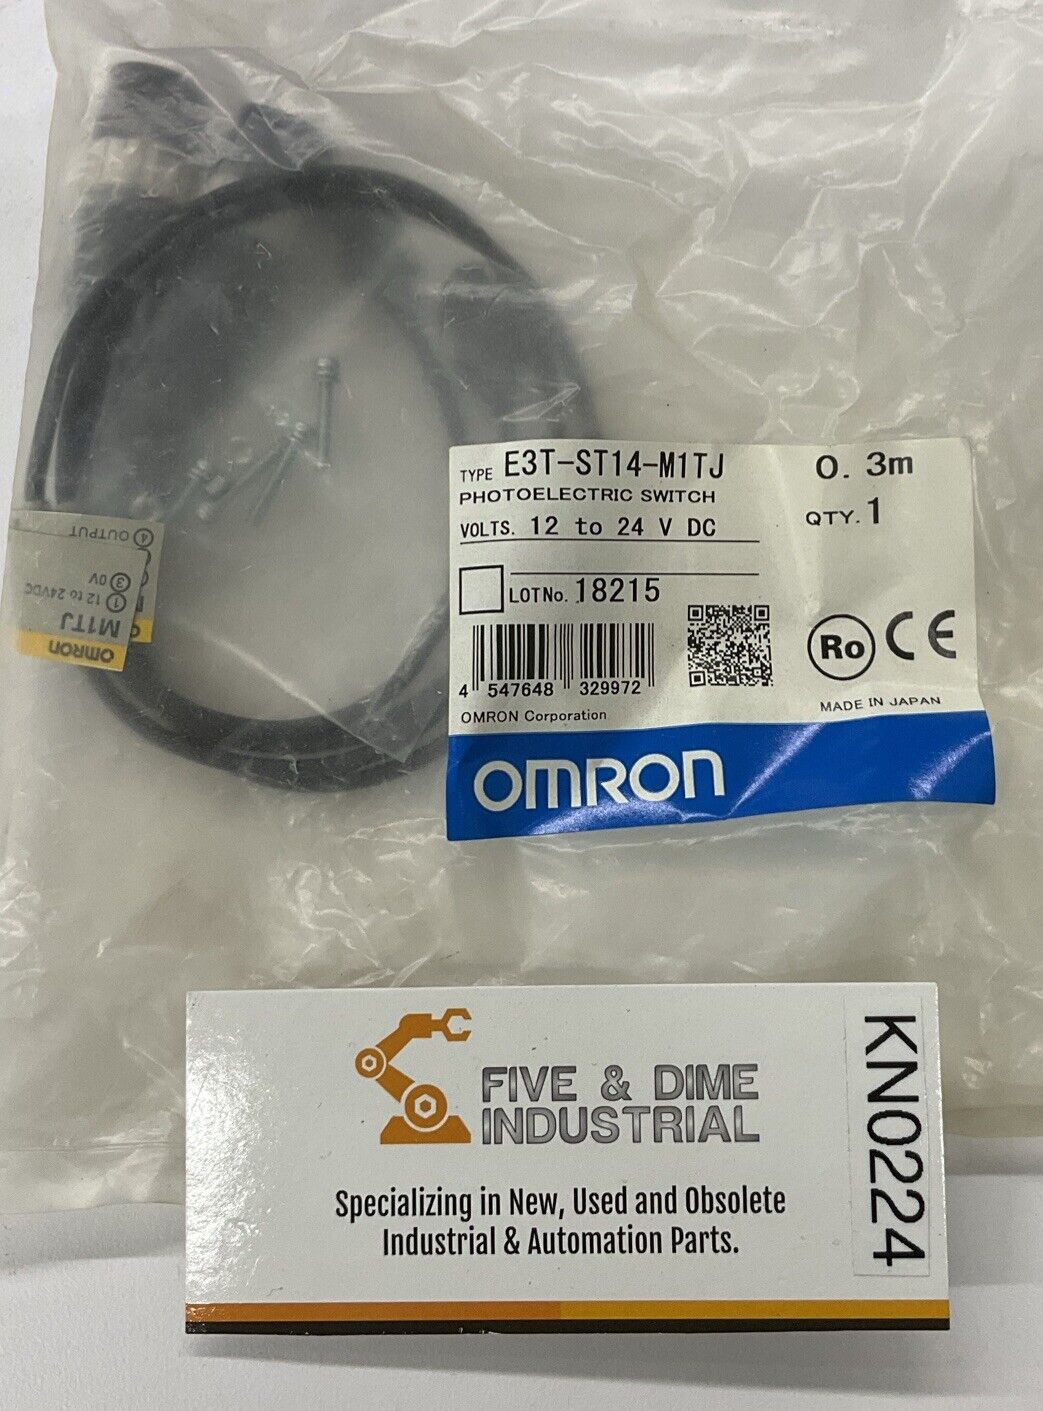 OMRON E3T-ST14-M1TJ New Photoelectric Switch 12-24 VDC 0.3M  (BL104)